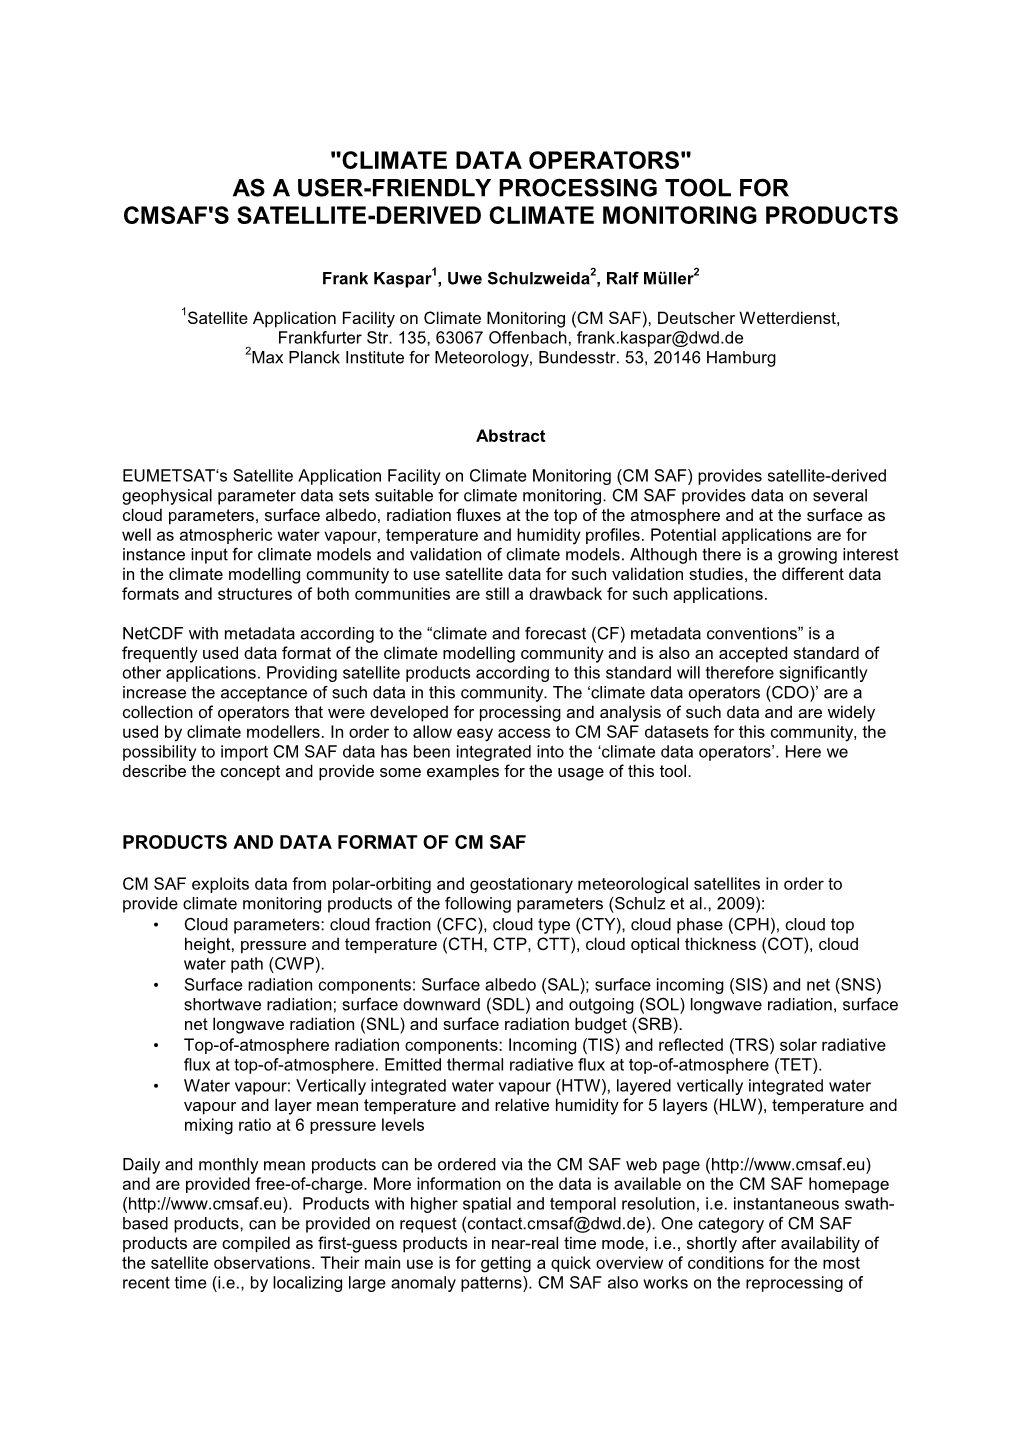 "Climate Data Operators" As a User-Friendly Processing Tool for Cmsaf's Satellite-Derived Climate Monitoring Products